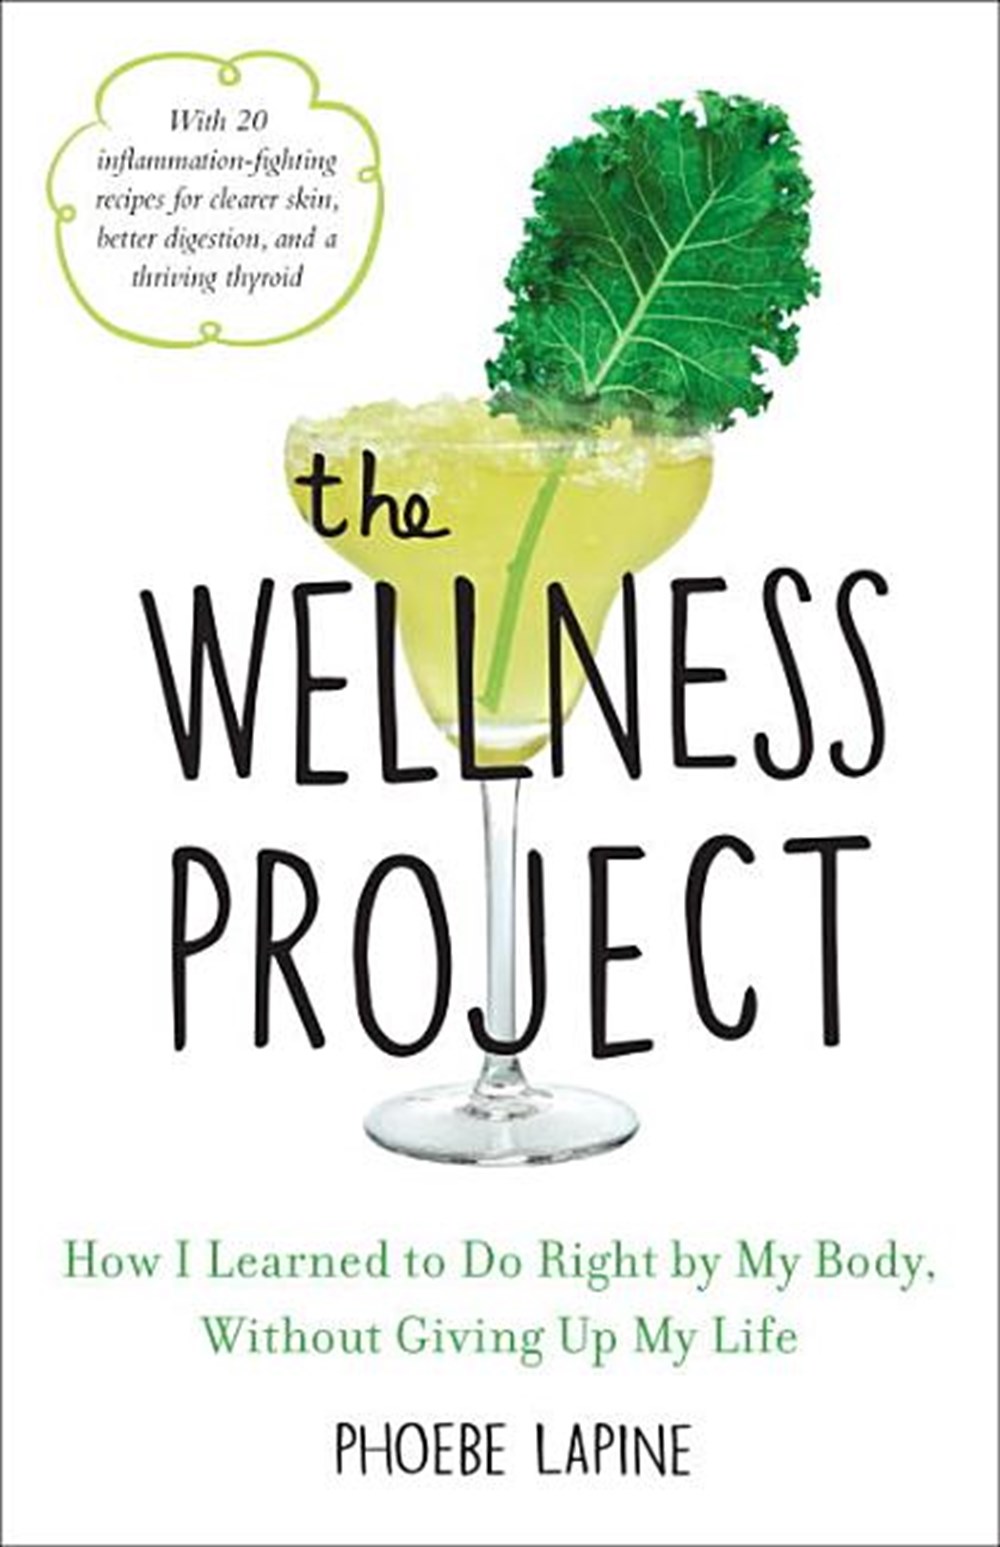 Wellness Project: How I Learned to Do Right by My Body, Without Giving Up My Life